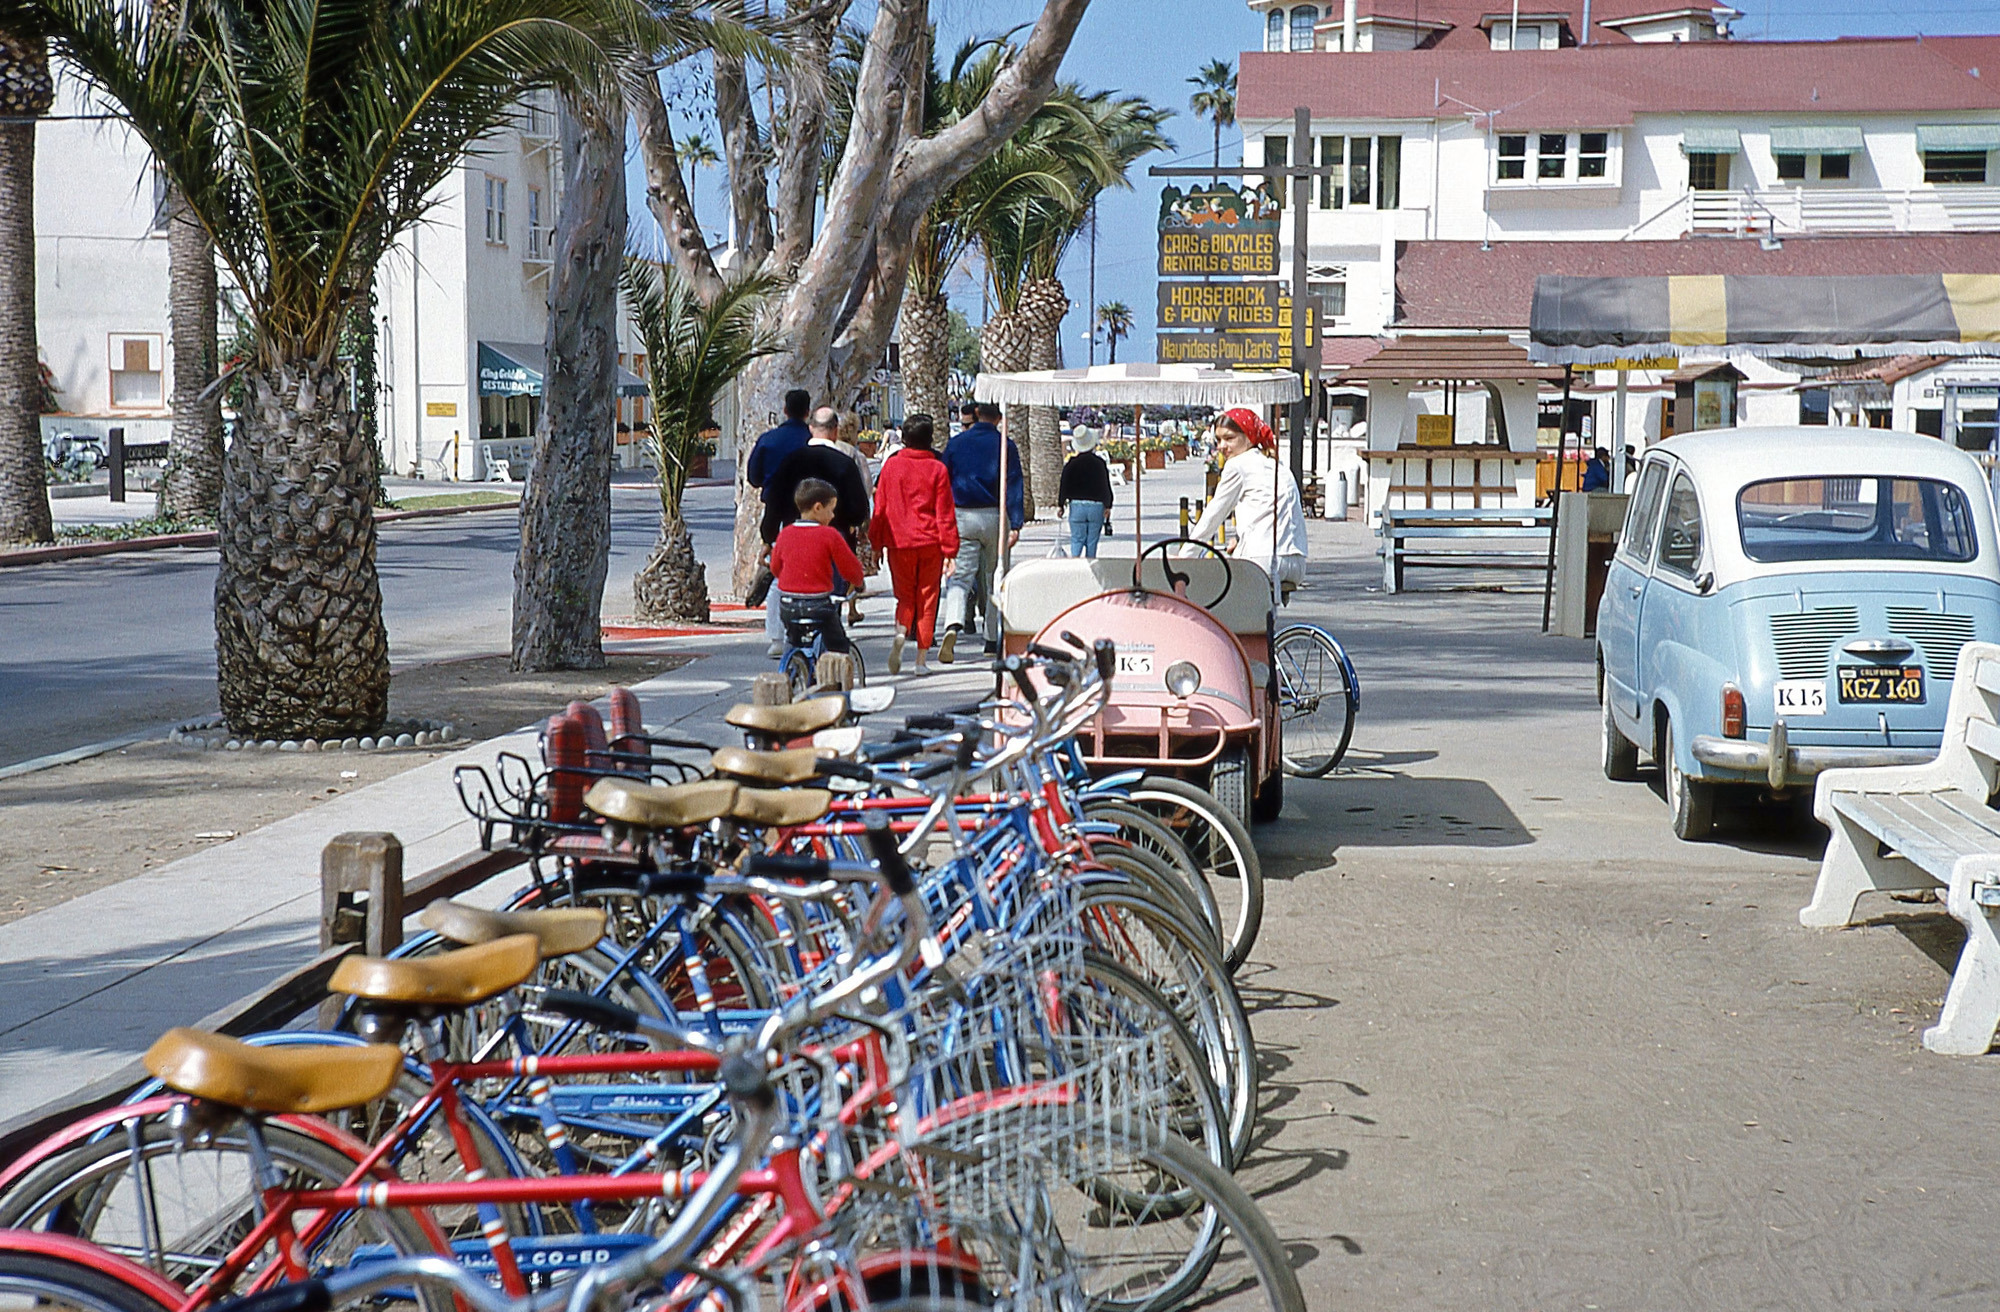 My sister and me, riding away on rental bikes on California's Catalina Island in June 1965. Kodachrome slide by Dad. View full size.